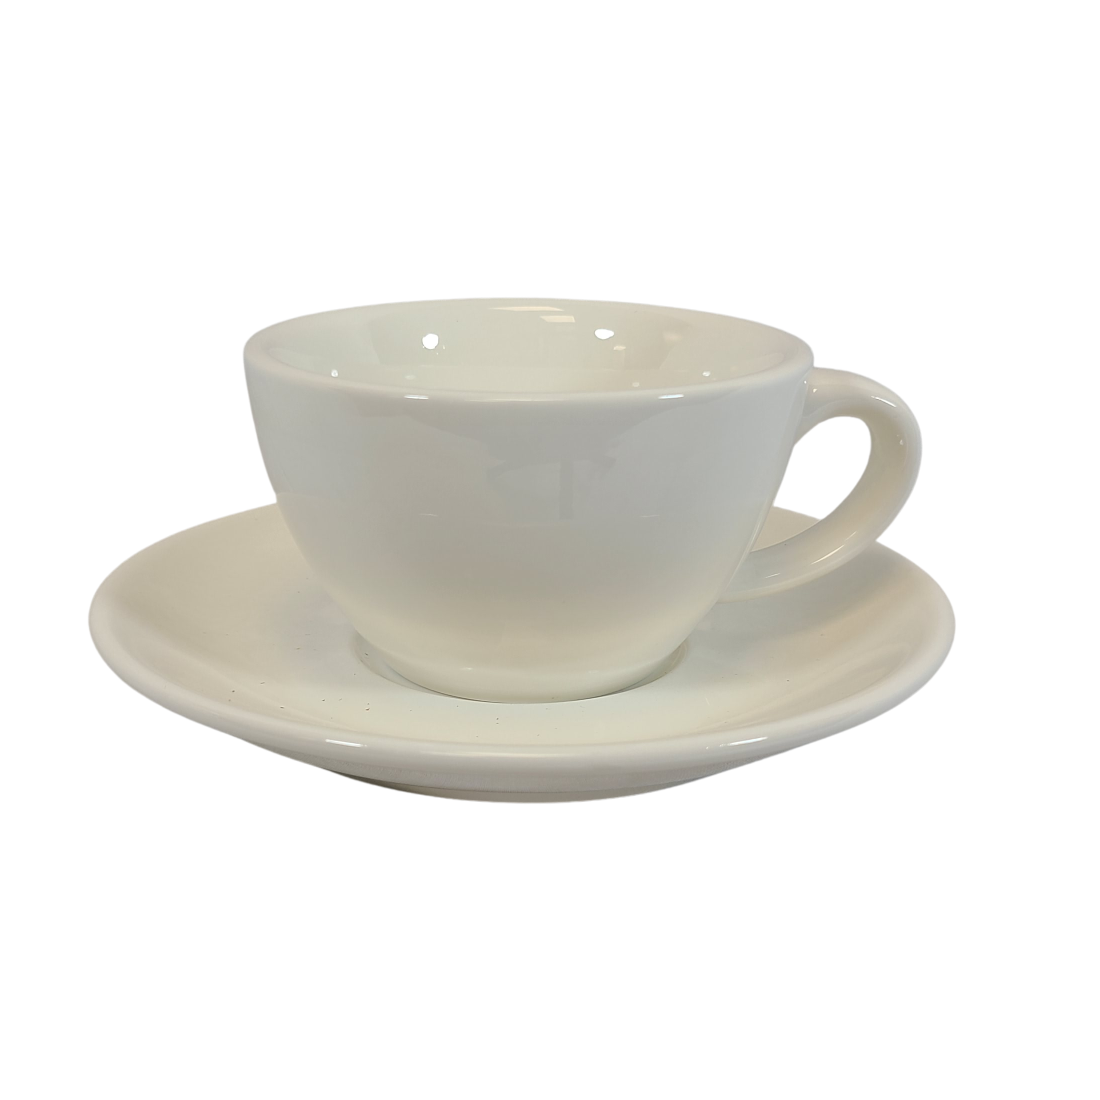 Coffee Addicts commercial ceramic cup with saucer in glossy white cappuccino cortado cup 5oz 150ml